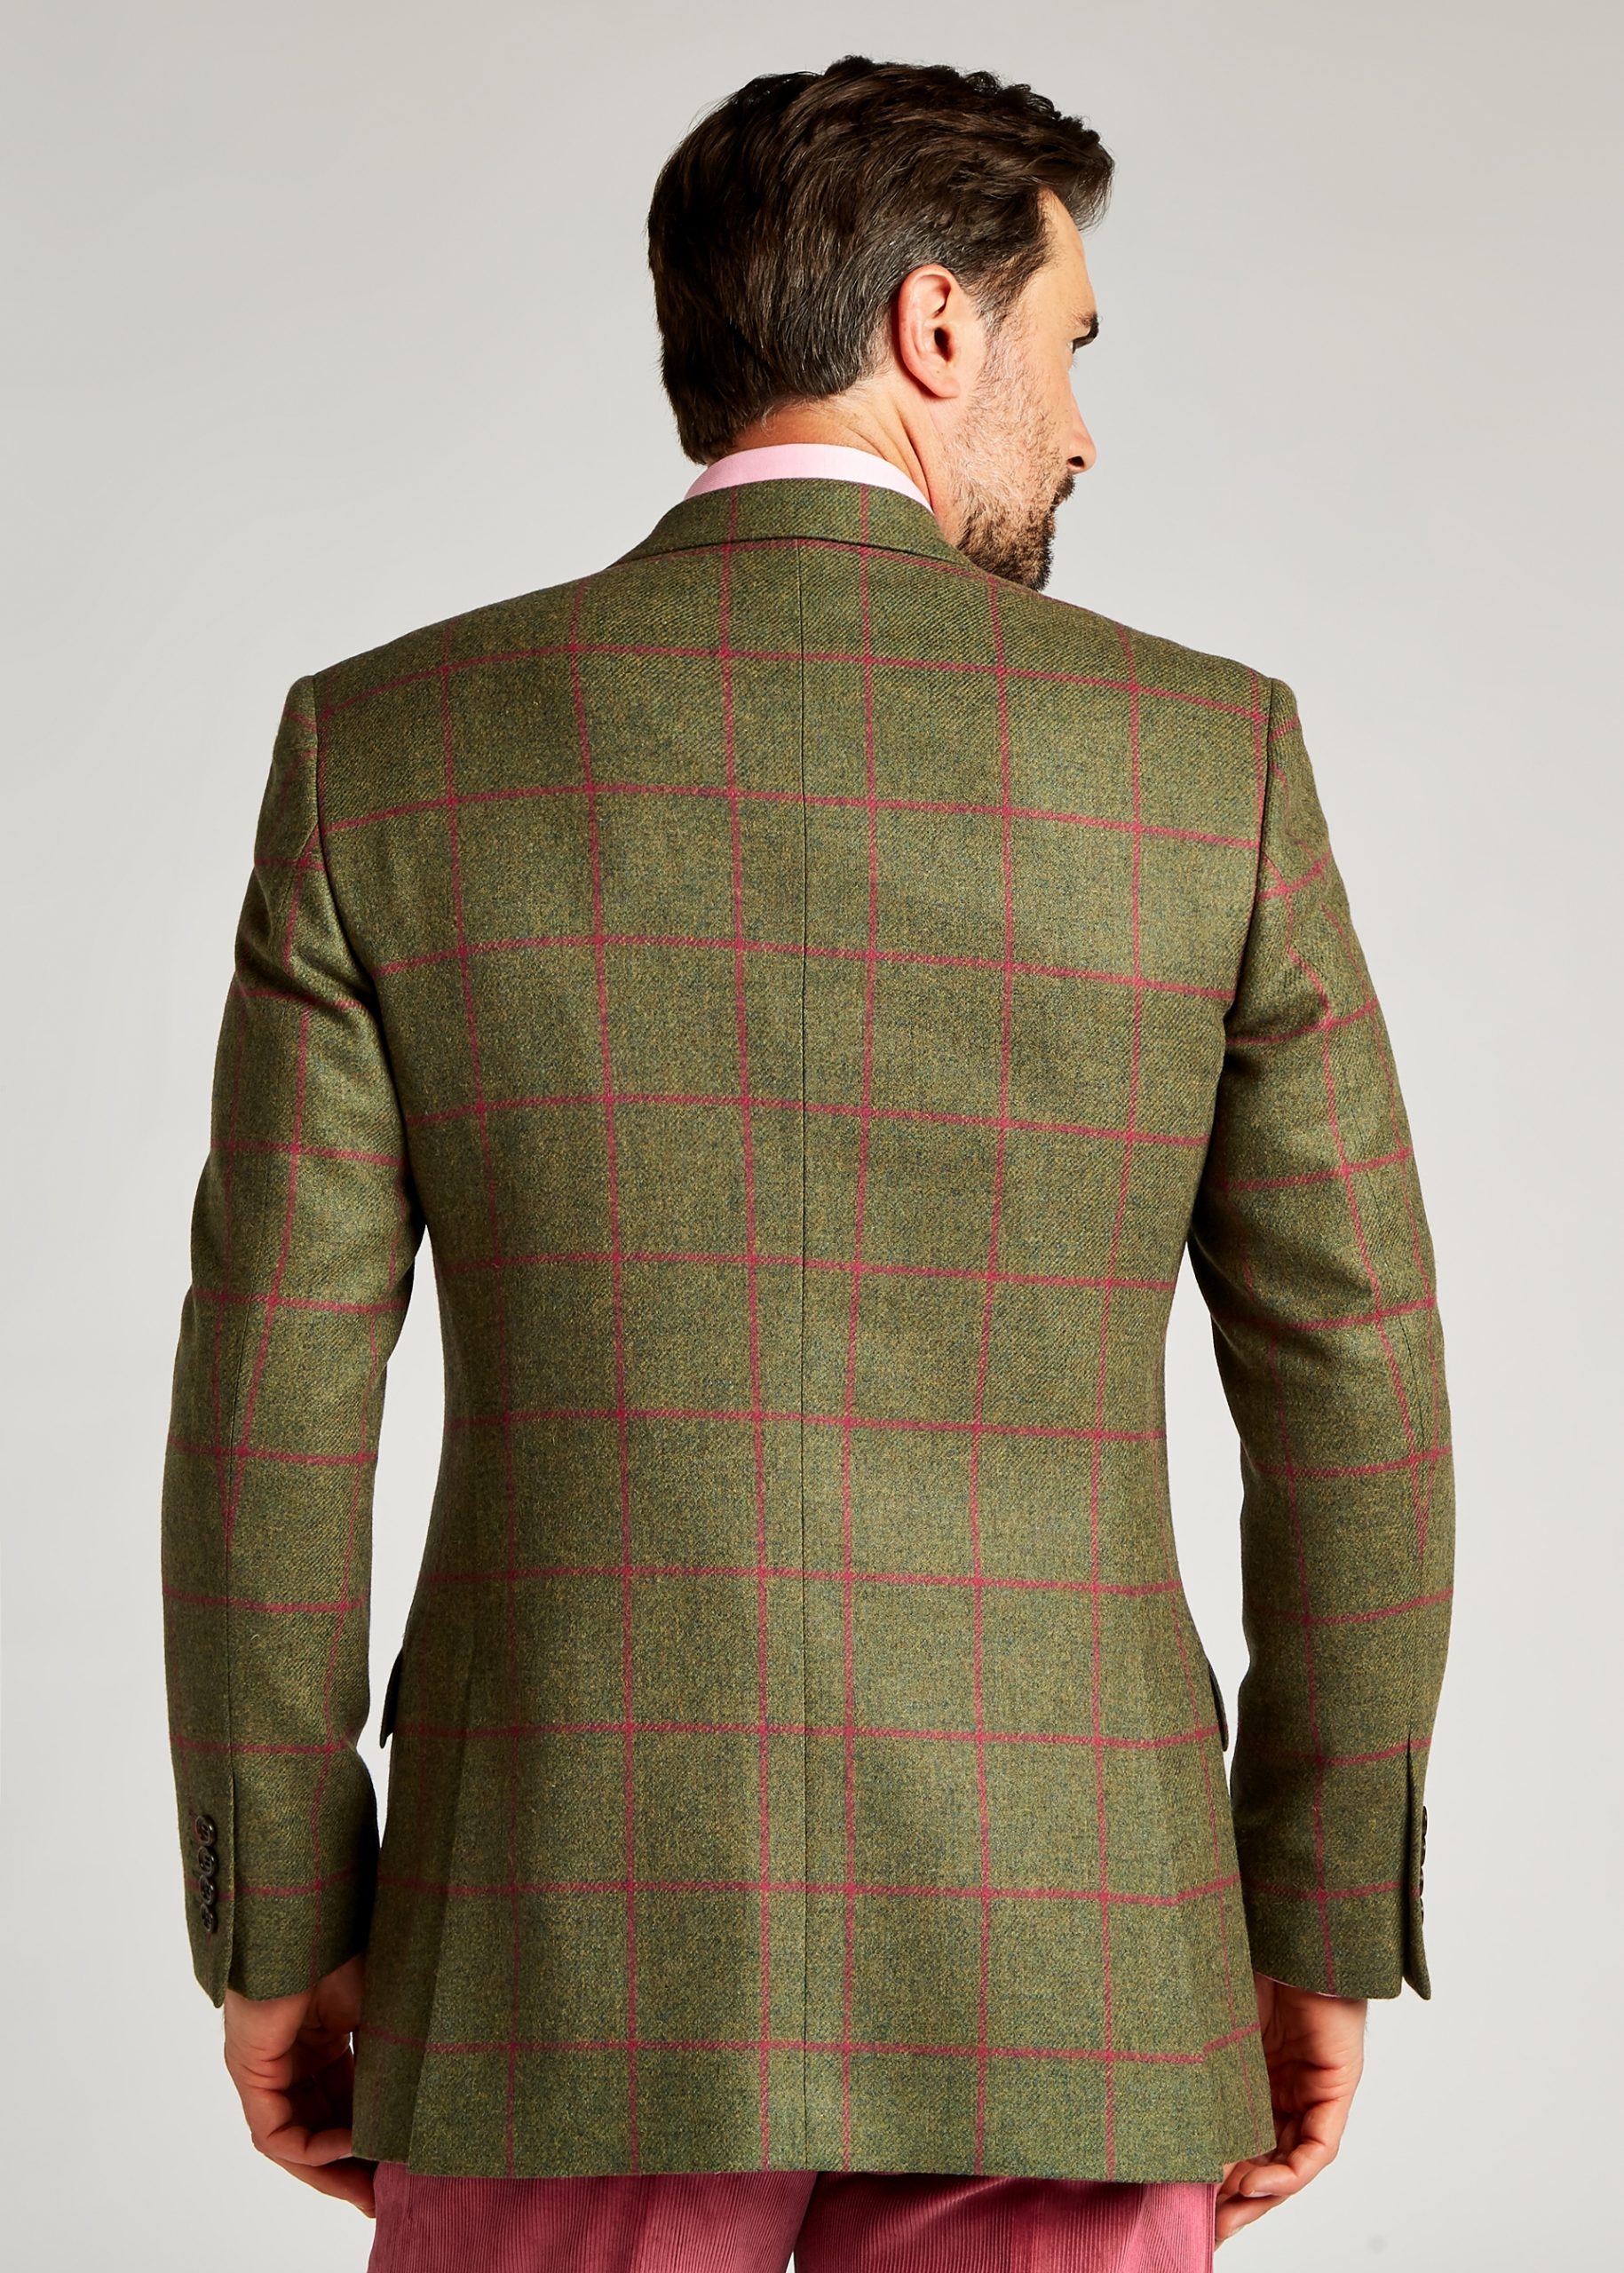 Men’s tailored fit tweed jacket in green and pink styled with pink trousers